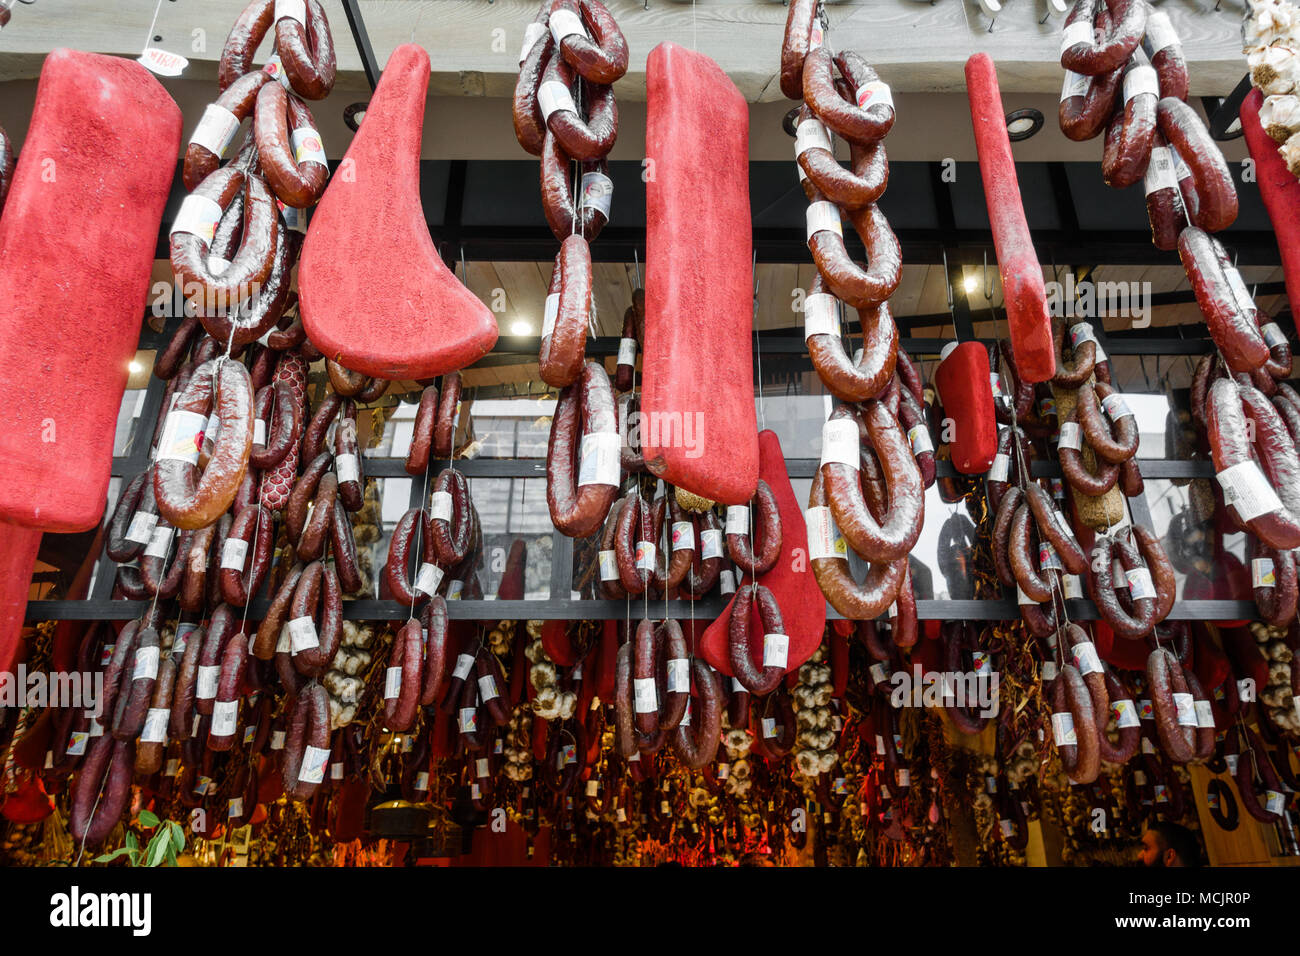 Low angle view of hanging sausages, Athens, Greece, Europe Stock Photo